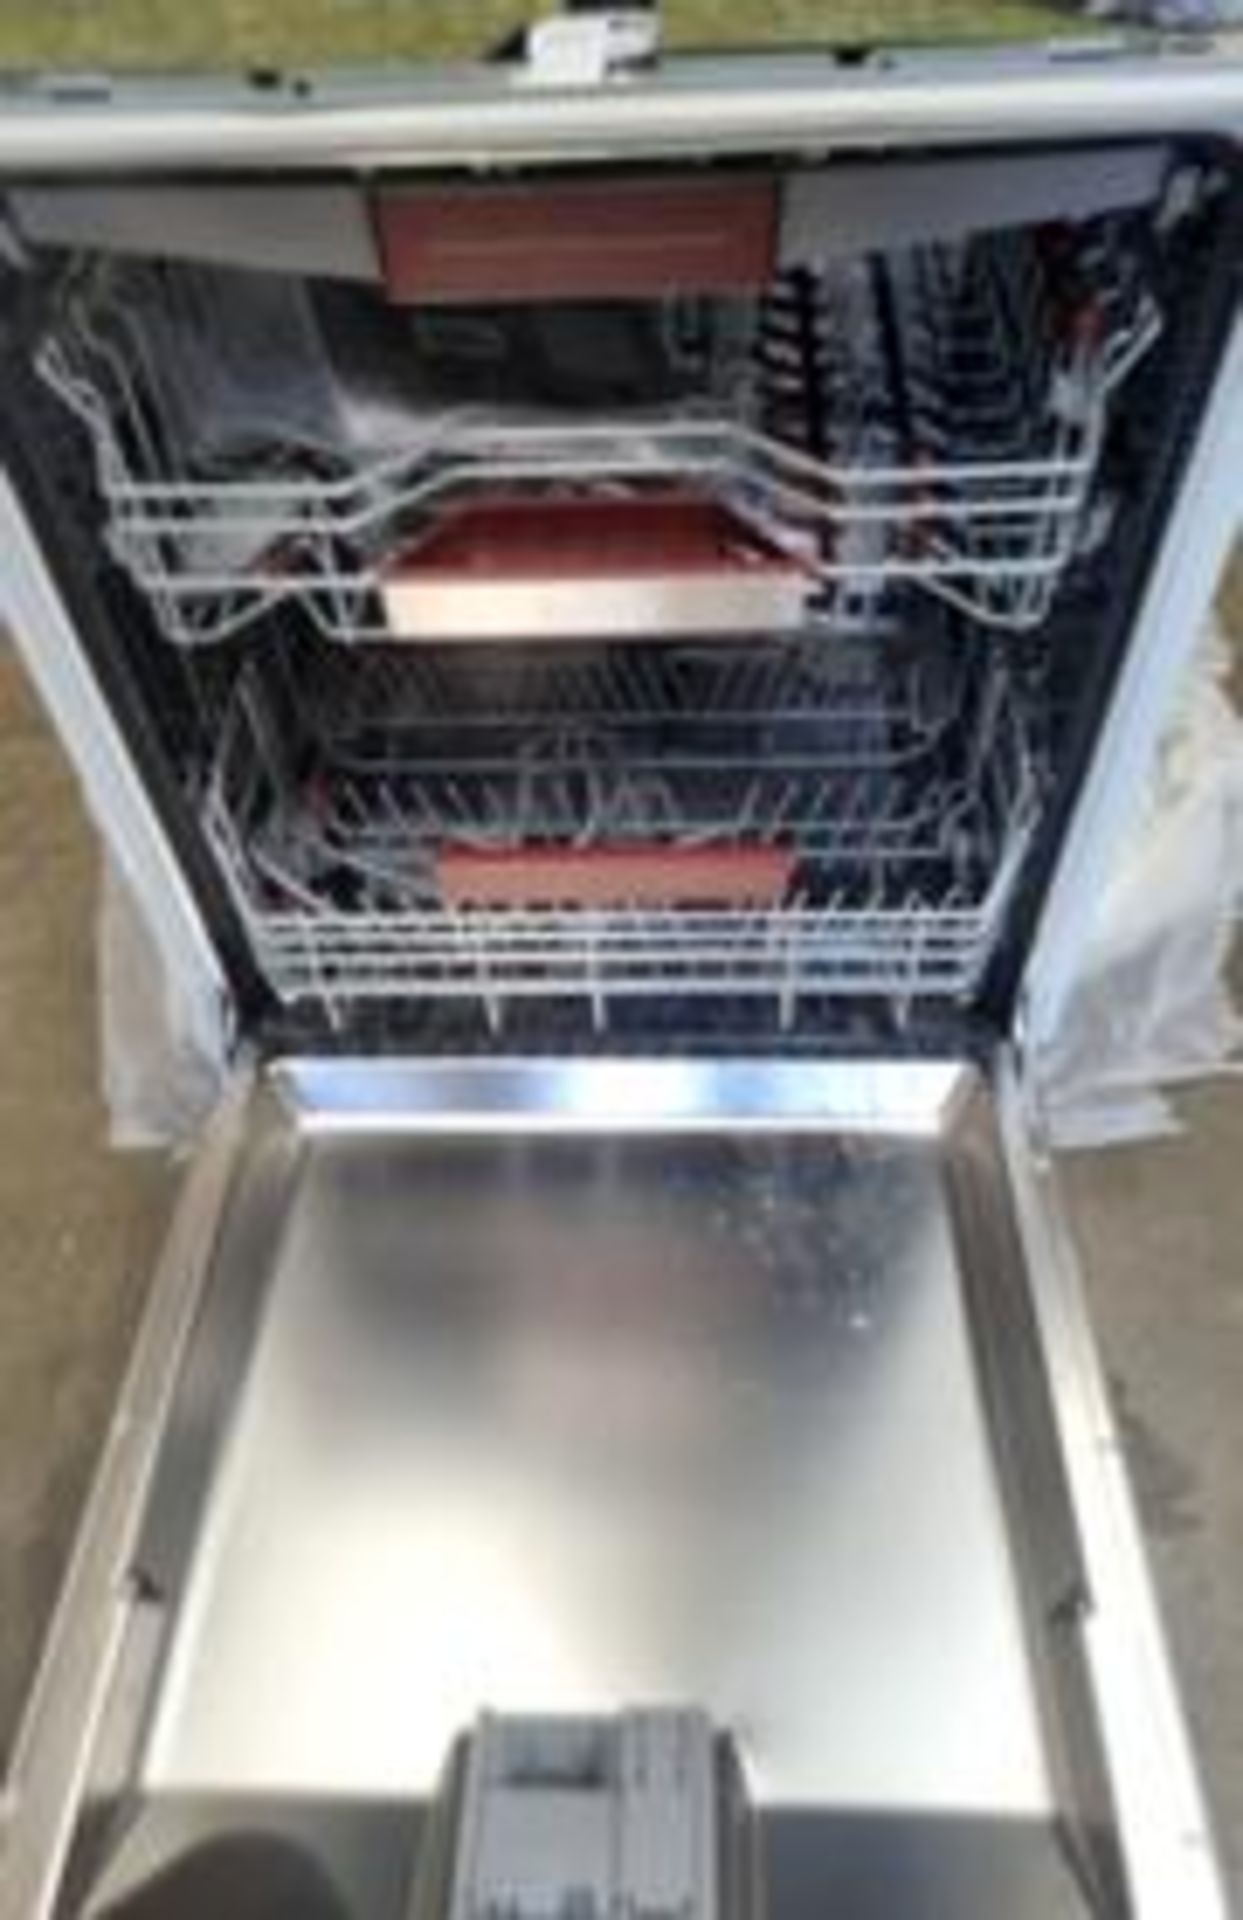 Grade B Neff N50 S155HCX27G Fully Integrated Dishwasher - RRP: £629 - Image 3 of 4